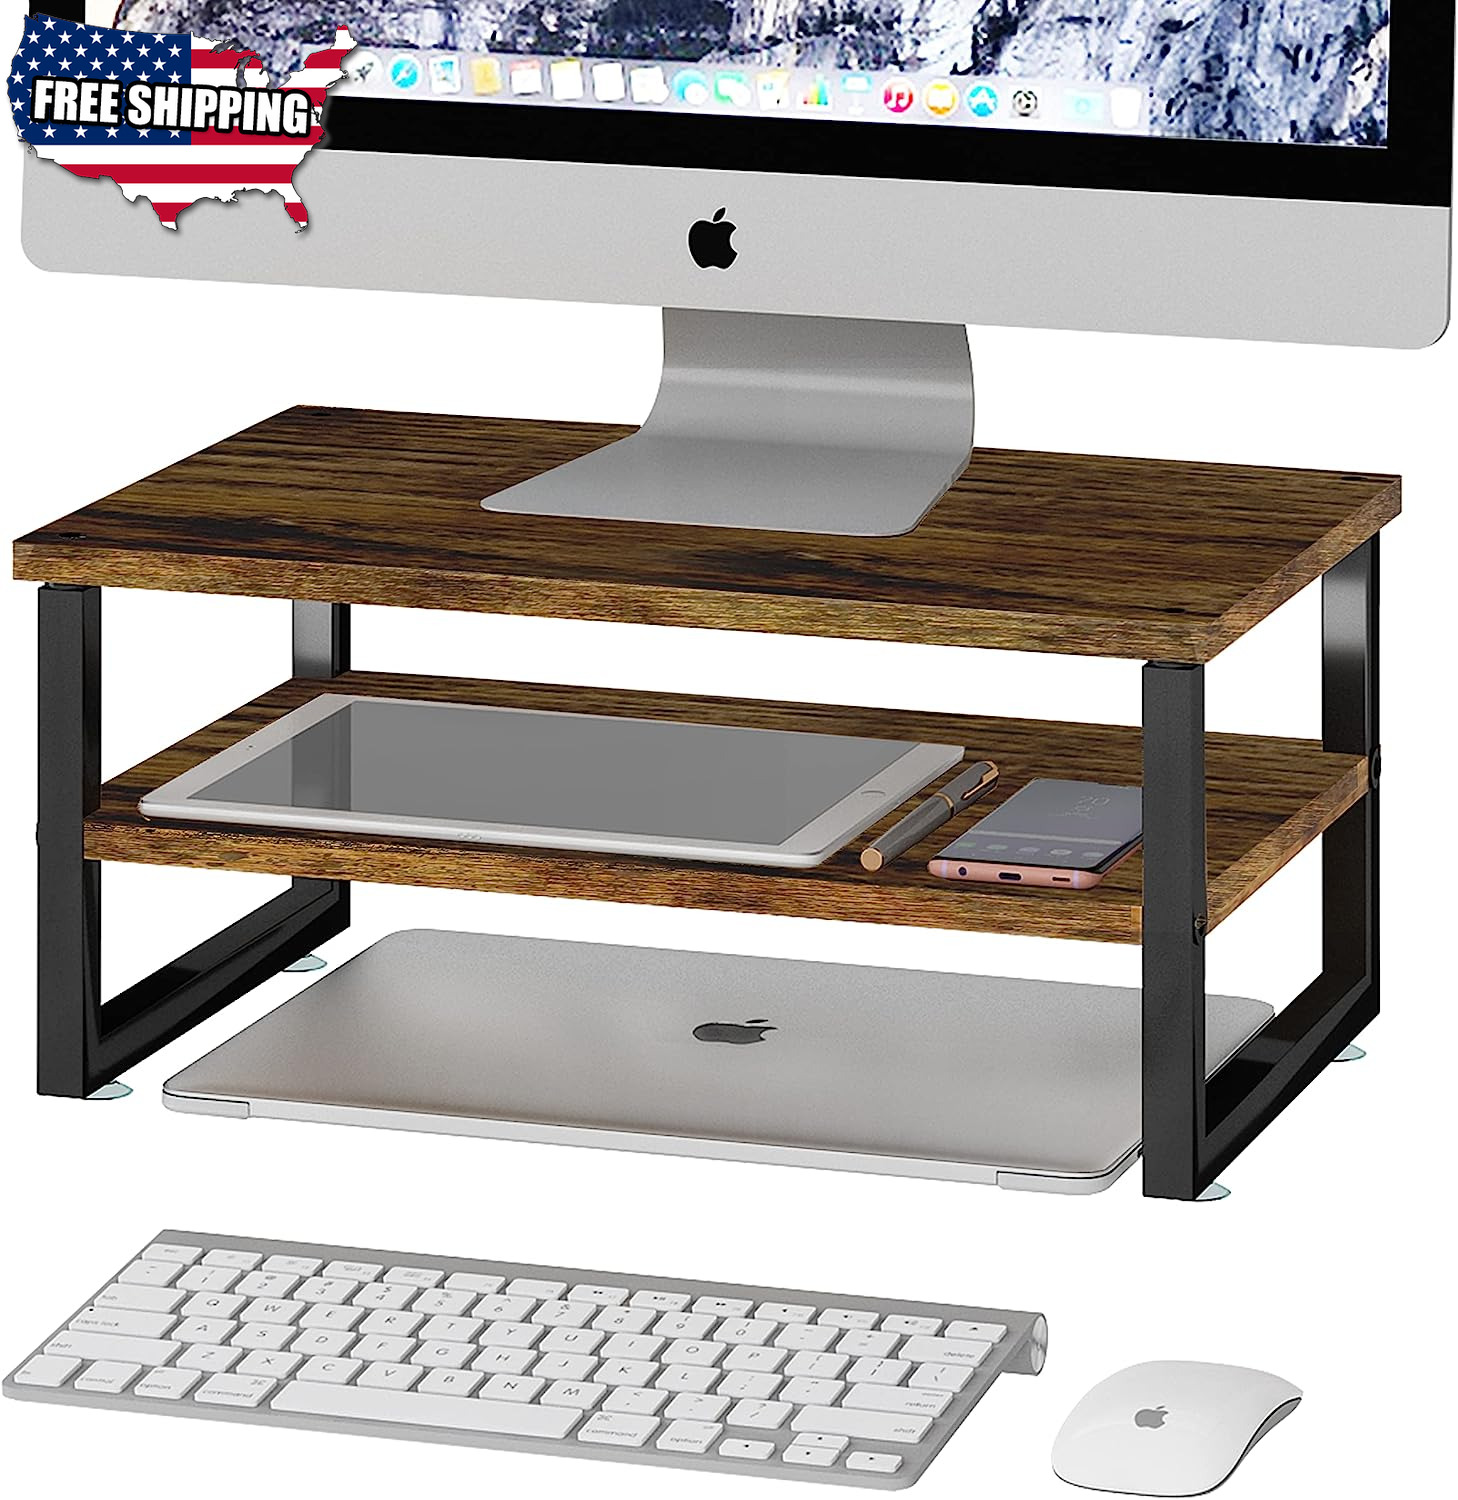 2-Tier Monitor Stand Riser Wood Desk Organizer Stand for iMac Computer Laptop